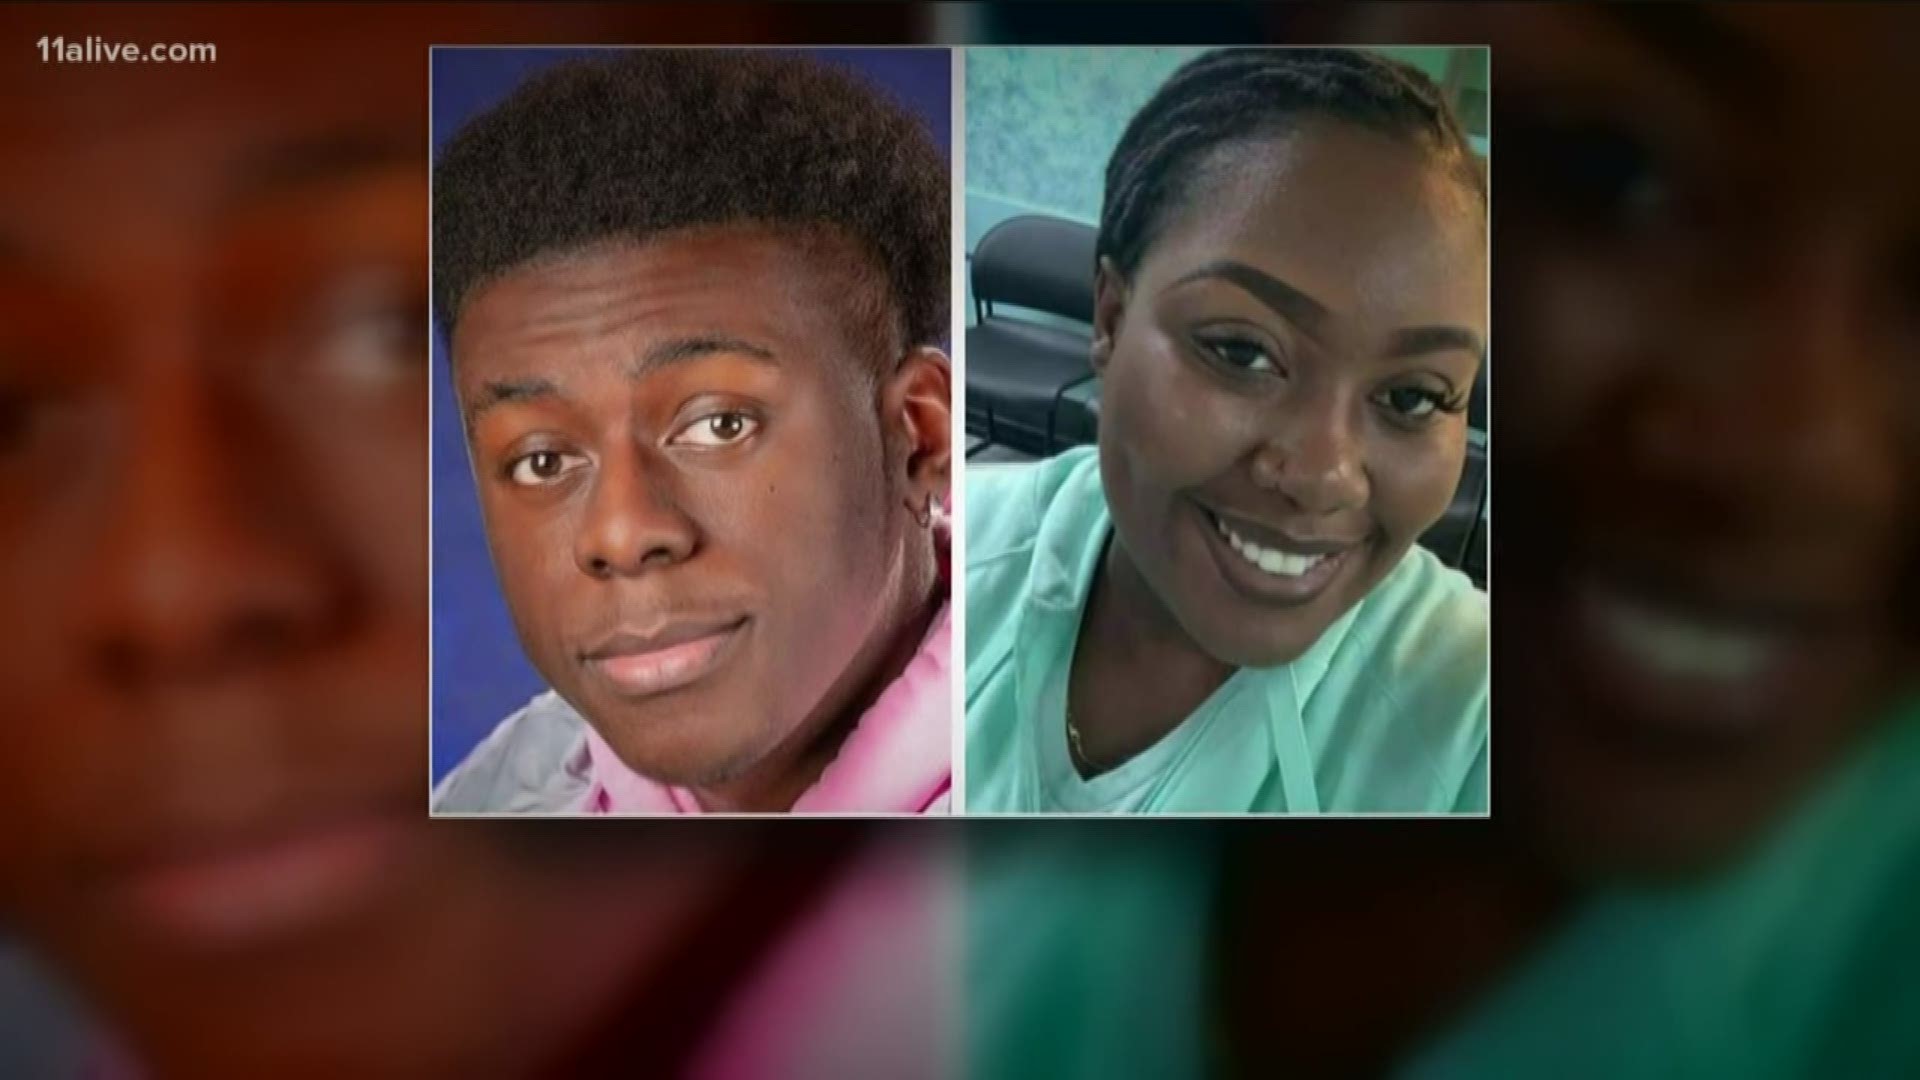 A mother says three deaths in Rockdale County were caused by her son-in-law killing her daughter and son.